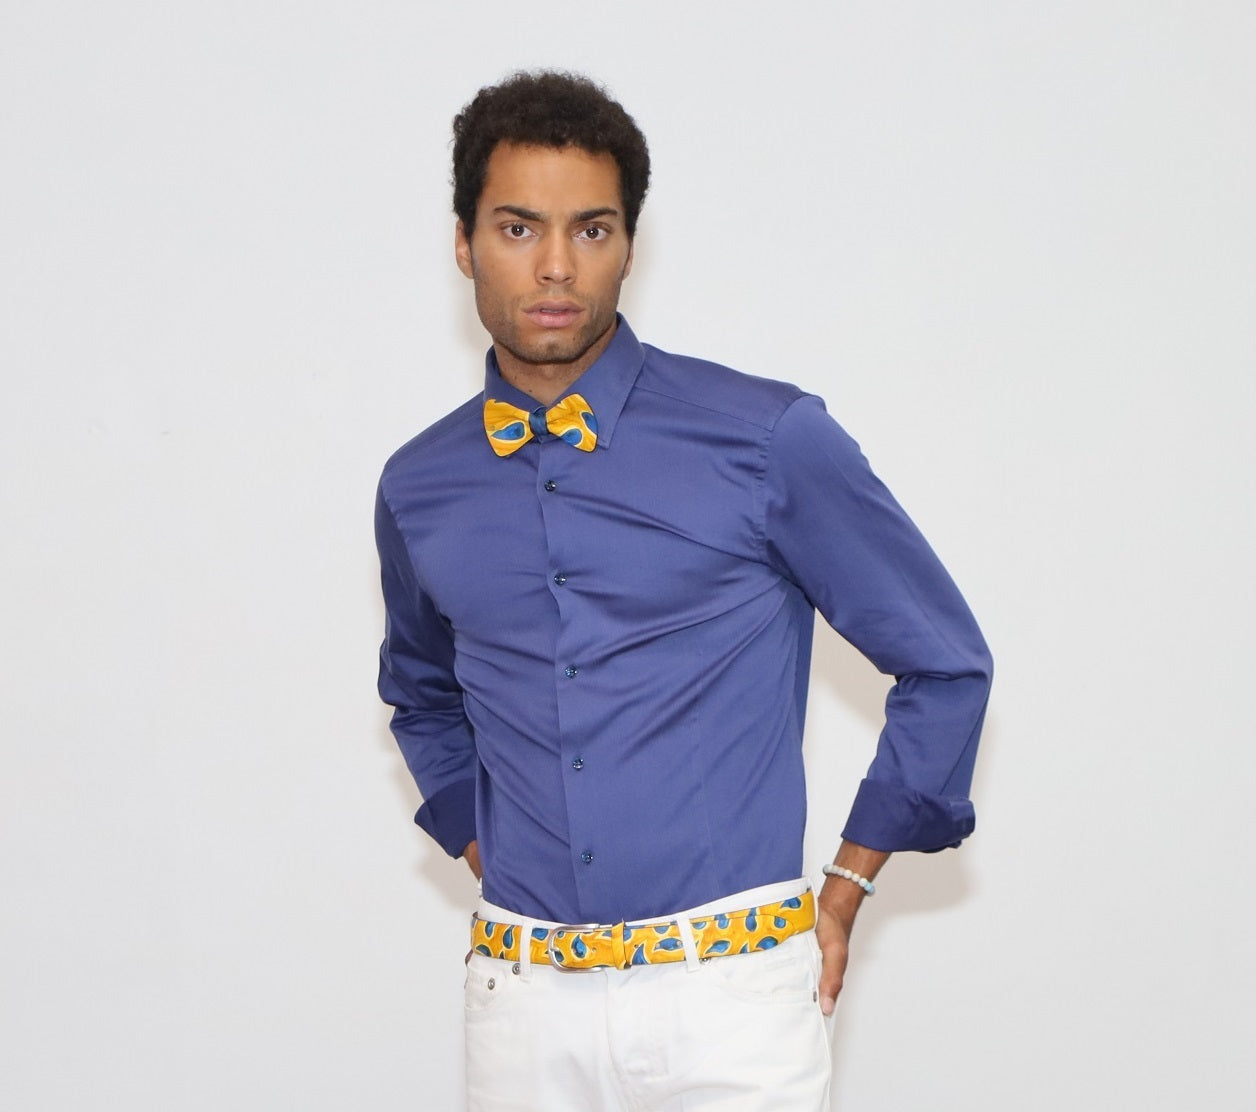 our model wearing white pants and a blue shirt with painted bow tie and belt in a white background